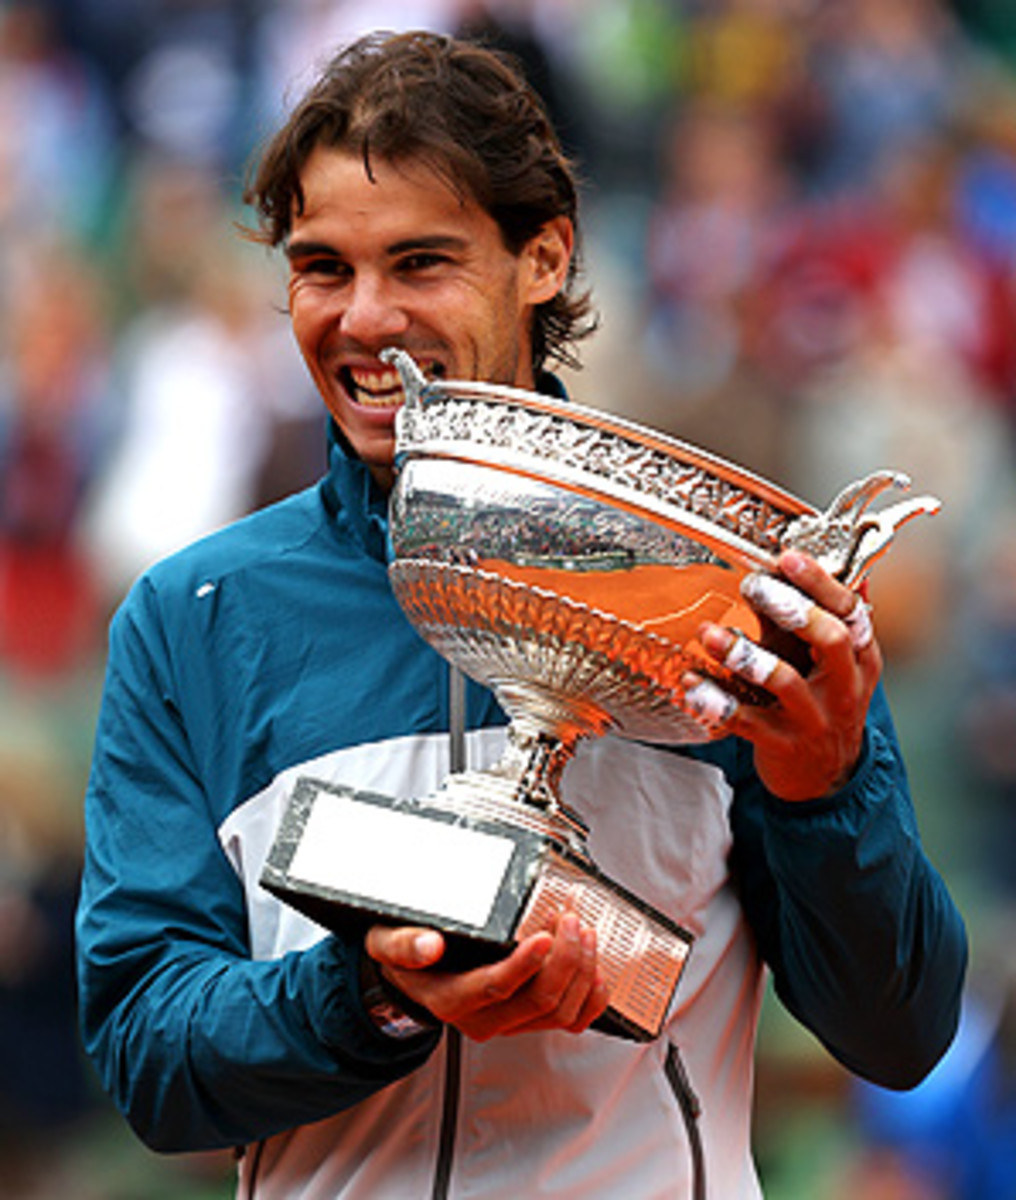 Even after just winning the French Open, Rafael Nadal was seeded fifth for Wimbledon.